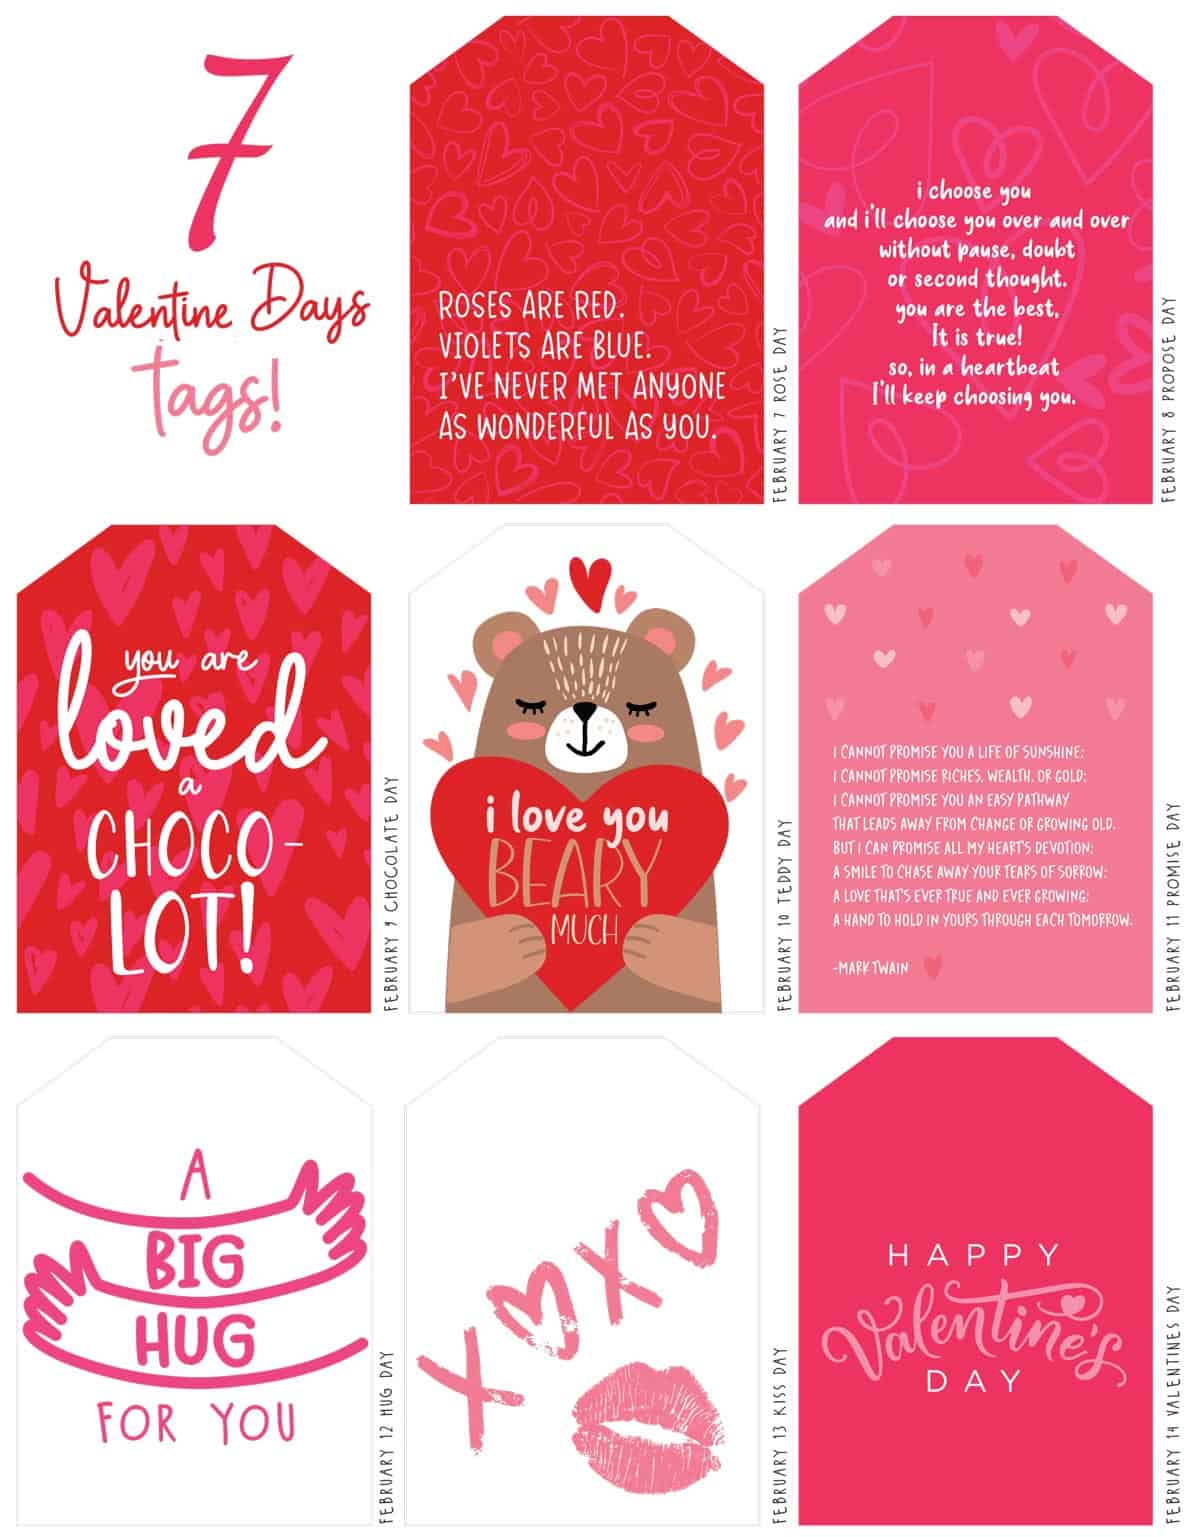 Gift tags with Valentine's sayings on them, by Skip to my Lou.